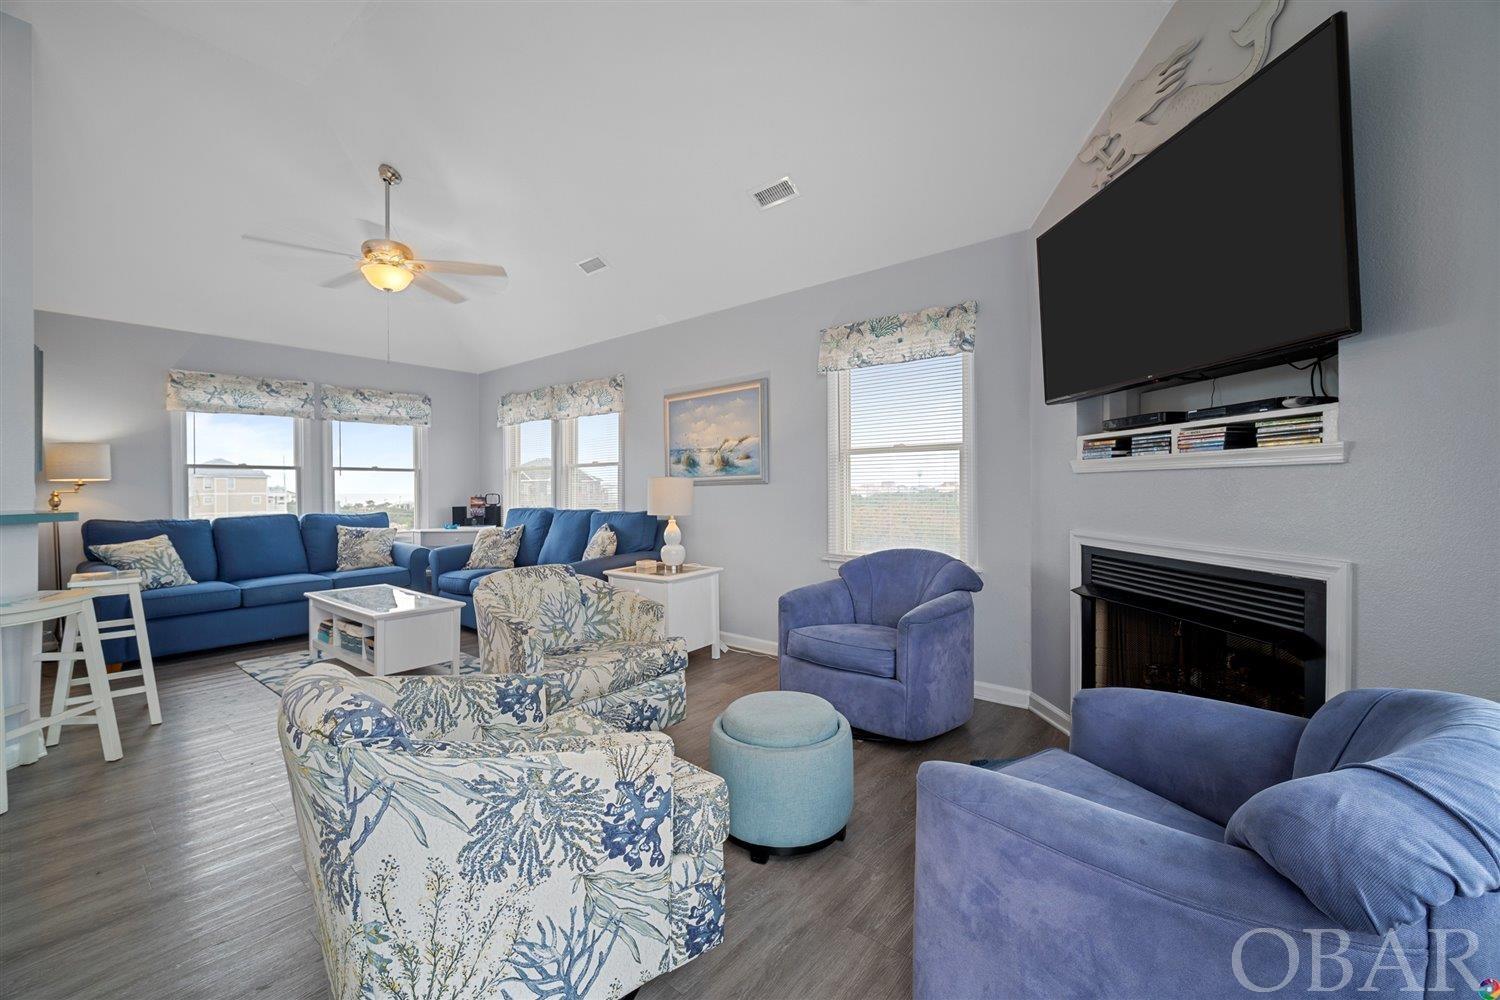 24231 South Shore Drive, Rodanthe, NC 27968, 7 Bedrooms Bedrooms, ,4 BathroomsBathrooms,Residential,For sale,South Shore Drive,124770